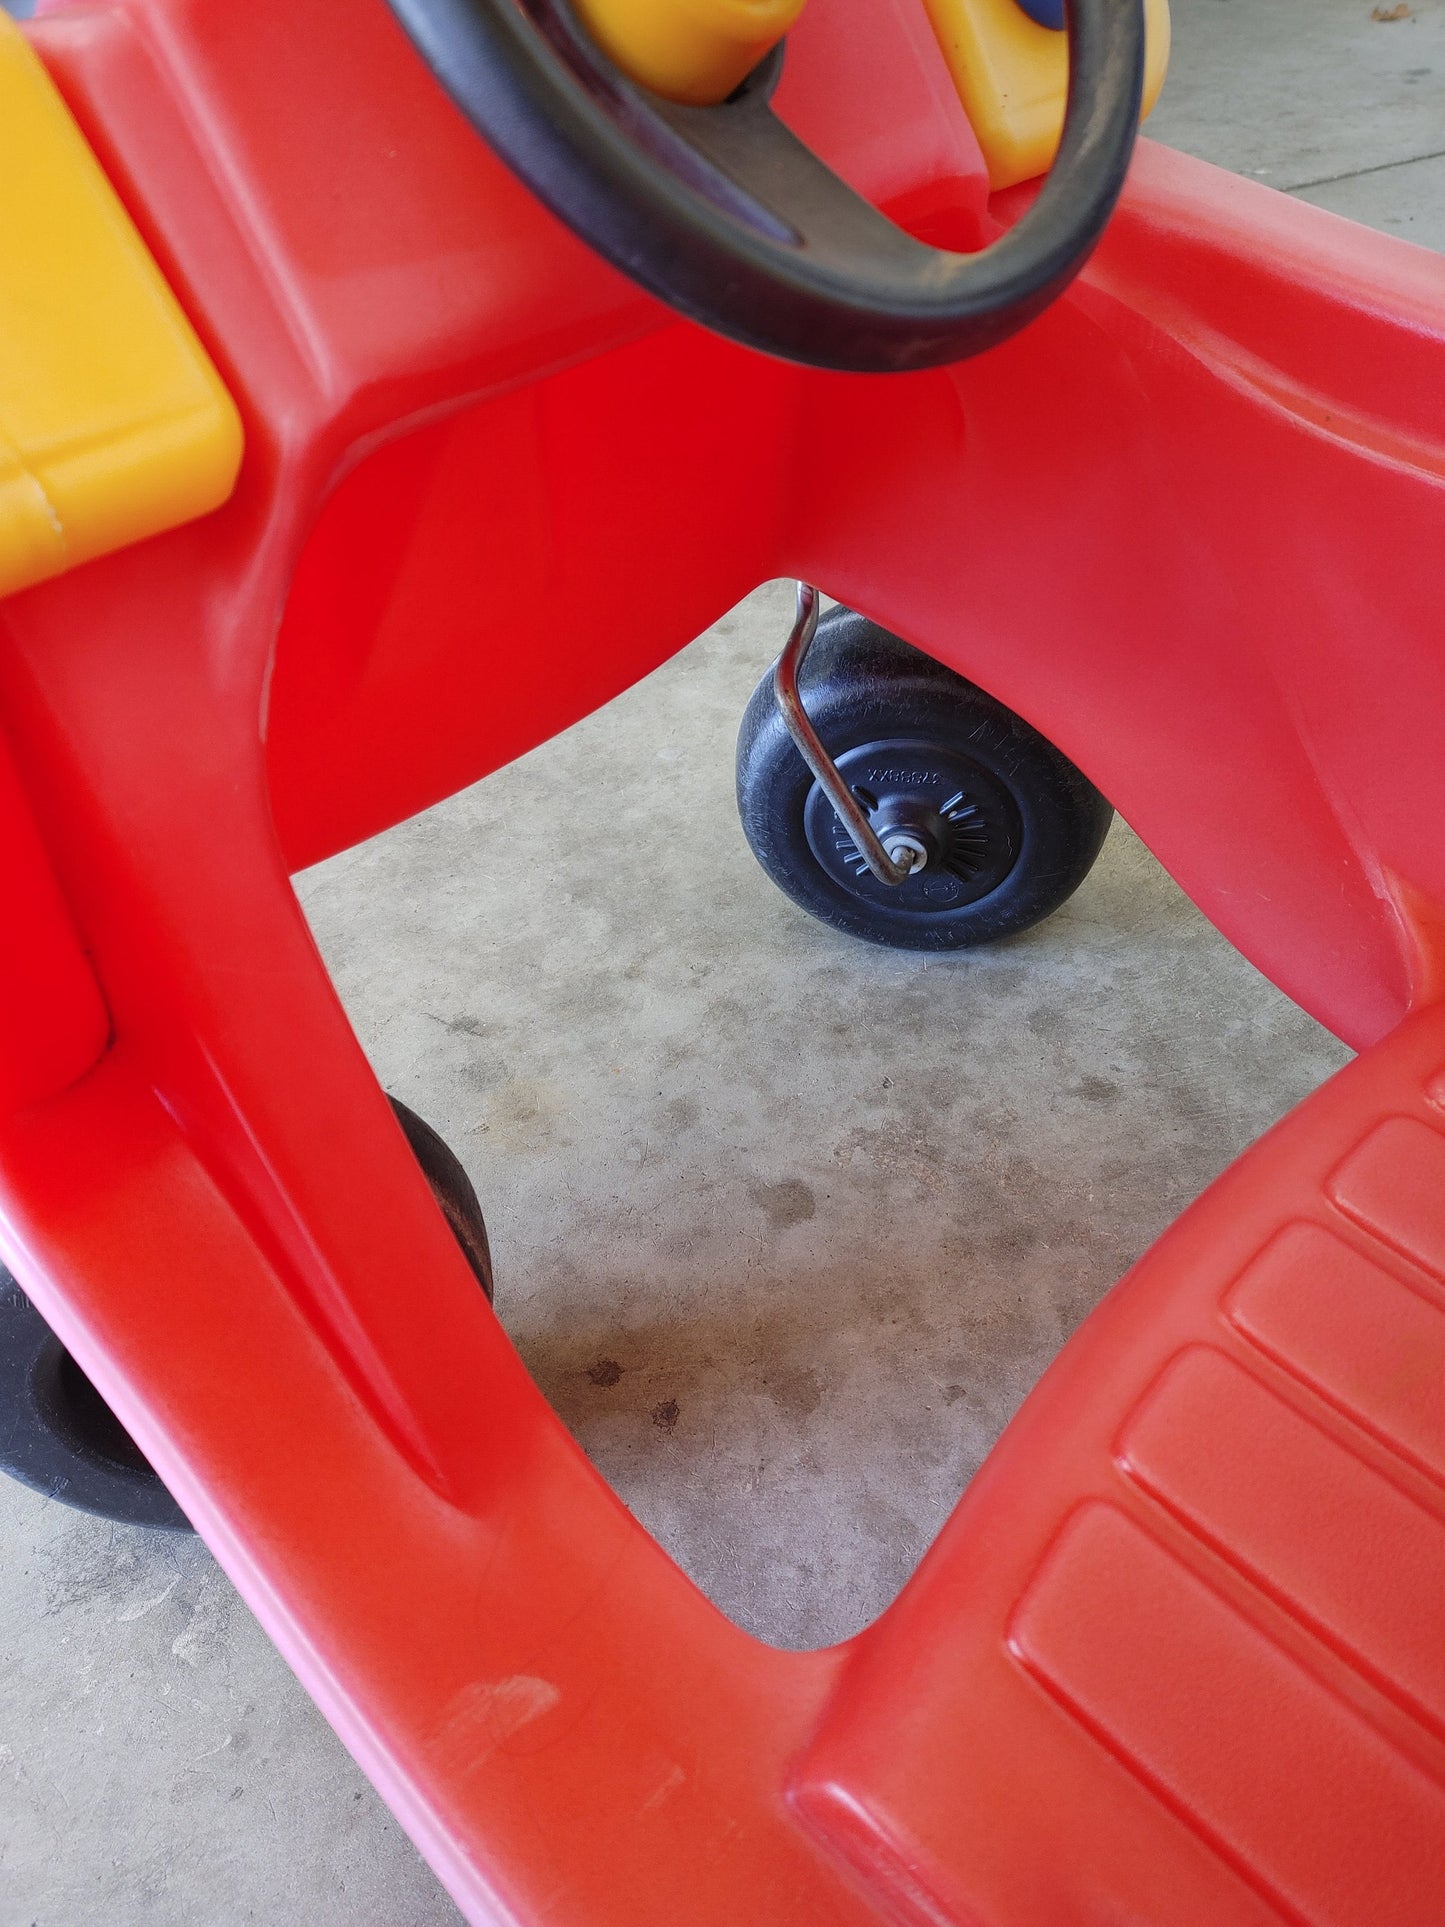 Foot Rest/ Floor Board Designed to be Compatible with the OLDER Little Tikes Cozy Coupe Push Car